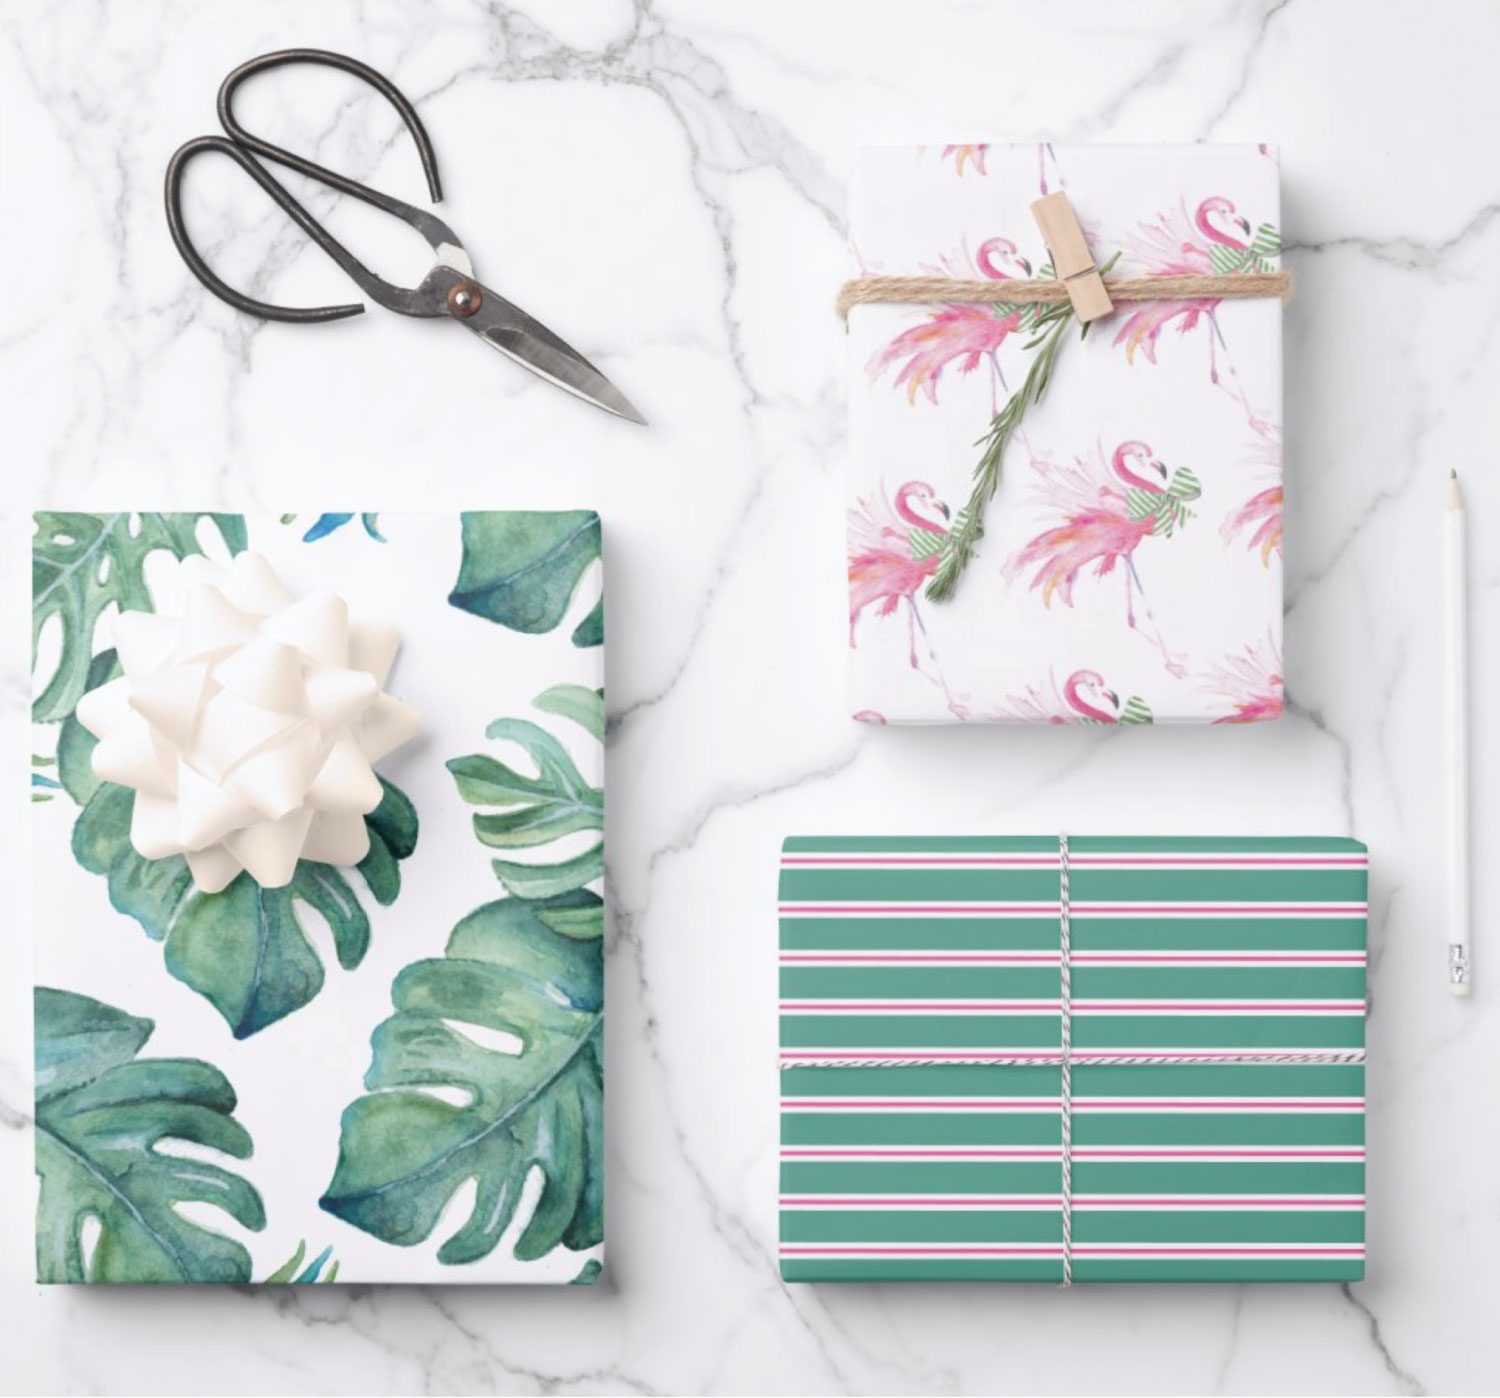 Shop my line of tropical inspired gift wrapping paper designed using my original watercolor art. Shown here are pink flamingos with green bows, monstera leaves and pink and green stripes. Perfect for Palm Beach Christmas. Click to shop my complete line.